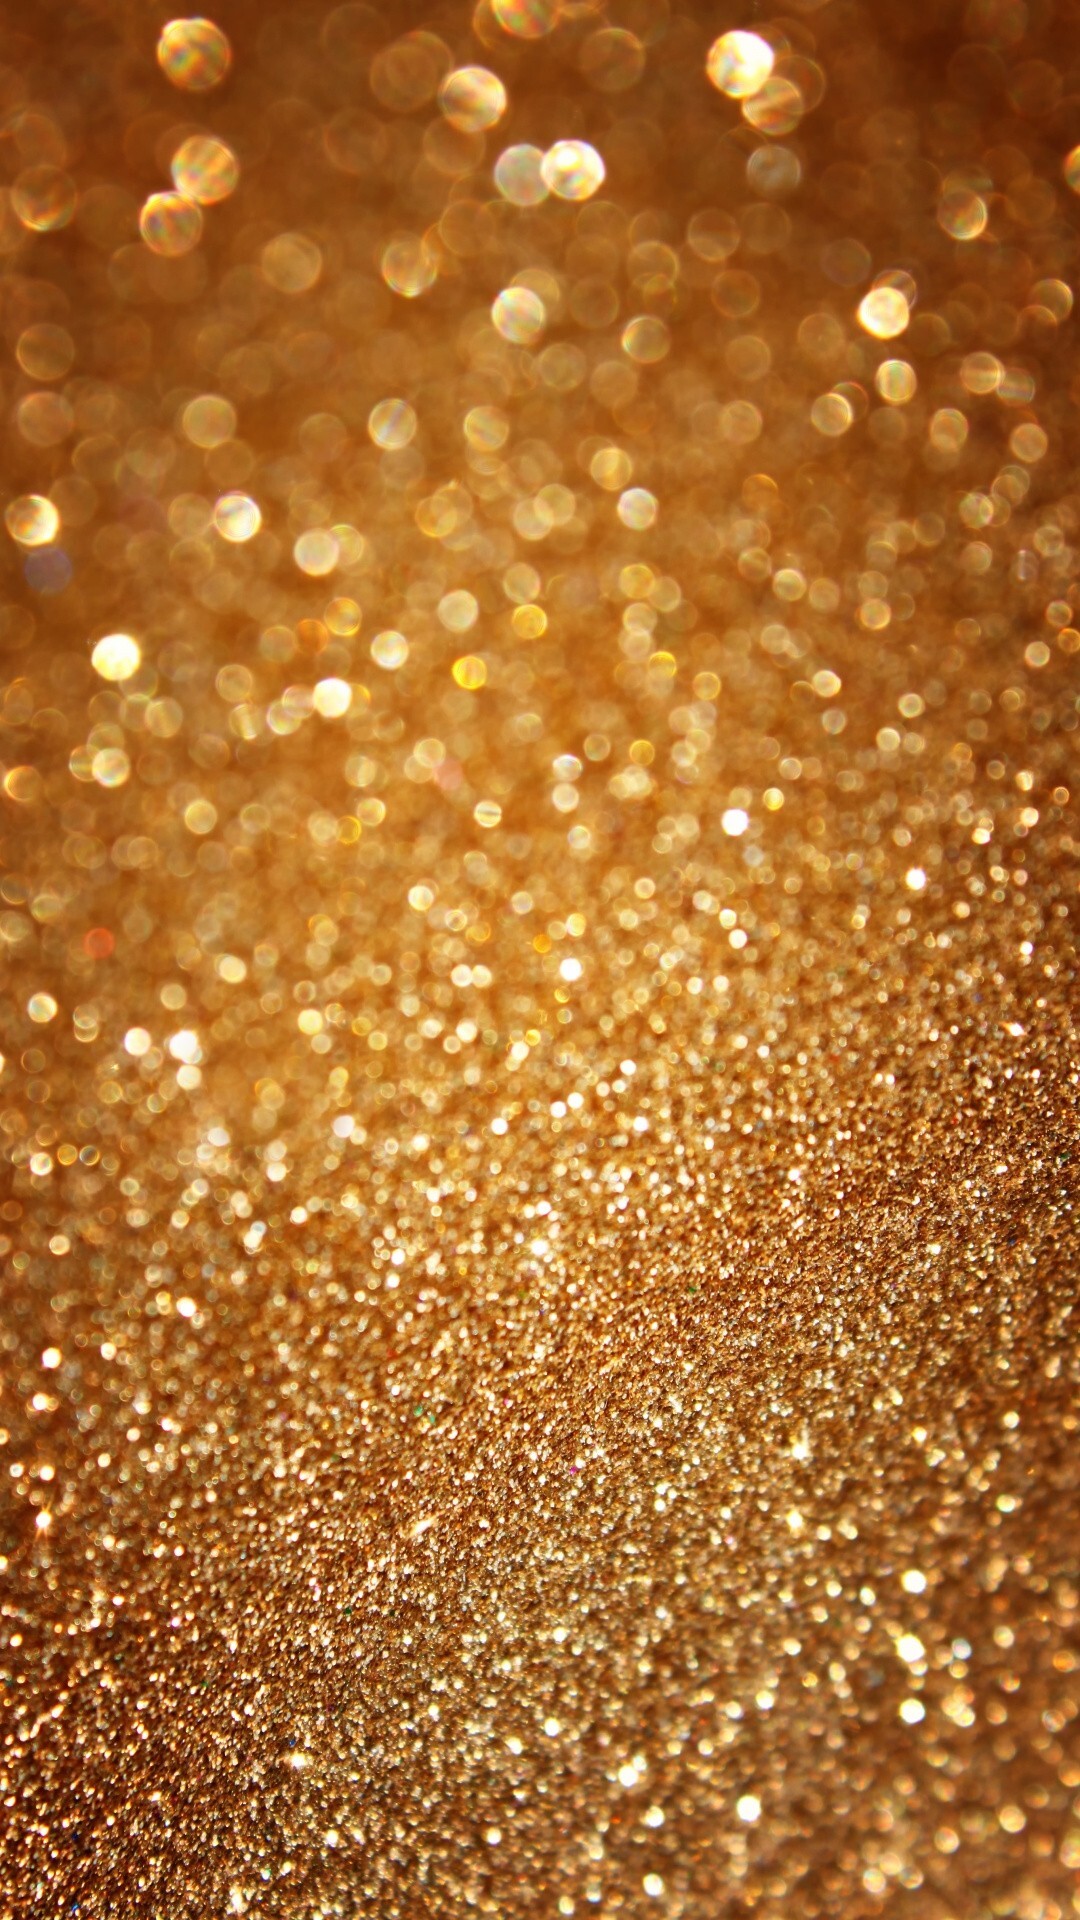 Gold Dots: Glittering metallic powder, Golden shimmer eyeshadows, Small pieces of gold material in uniform shape. 1080x1920 Full HD Background.